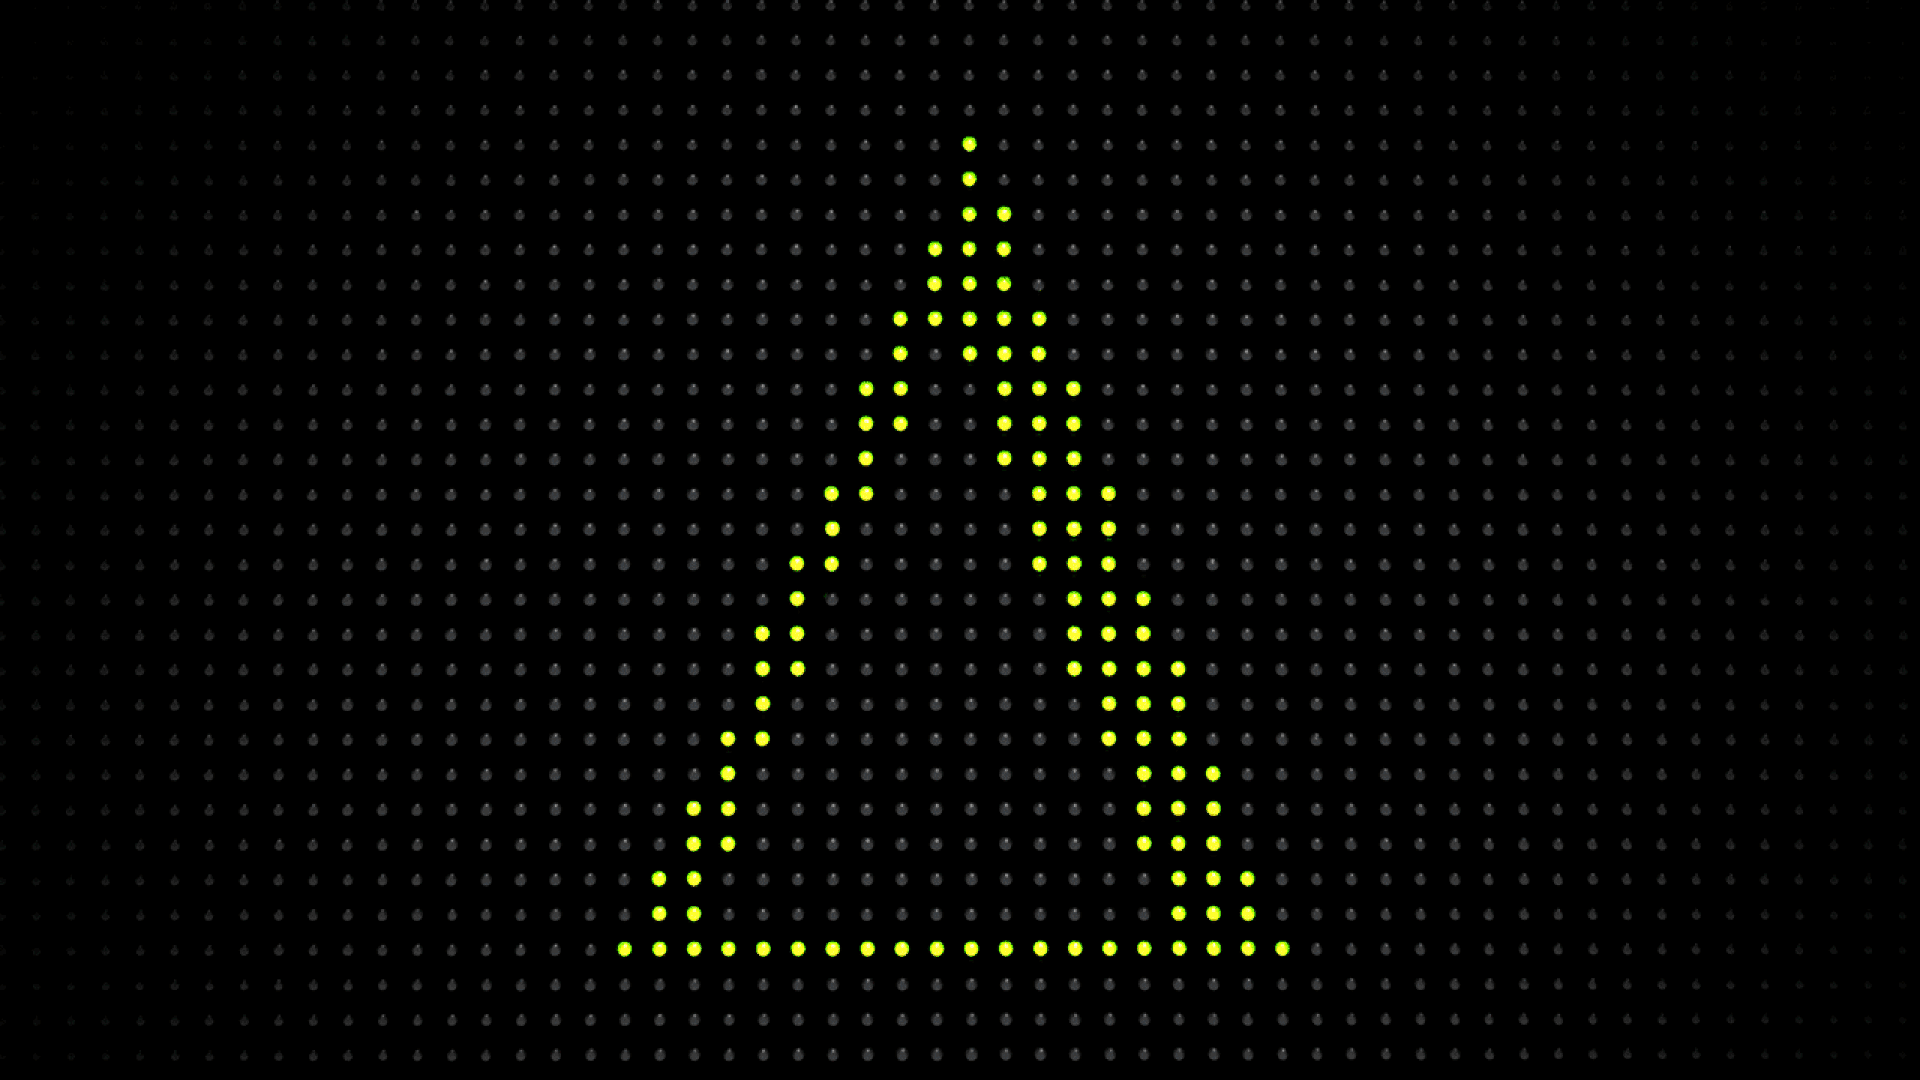 Animated illustration of a delta symbol appearing like an upward arrow on a stock LED board which rotates to become a downward pointing arrow